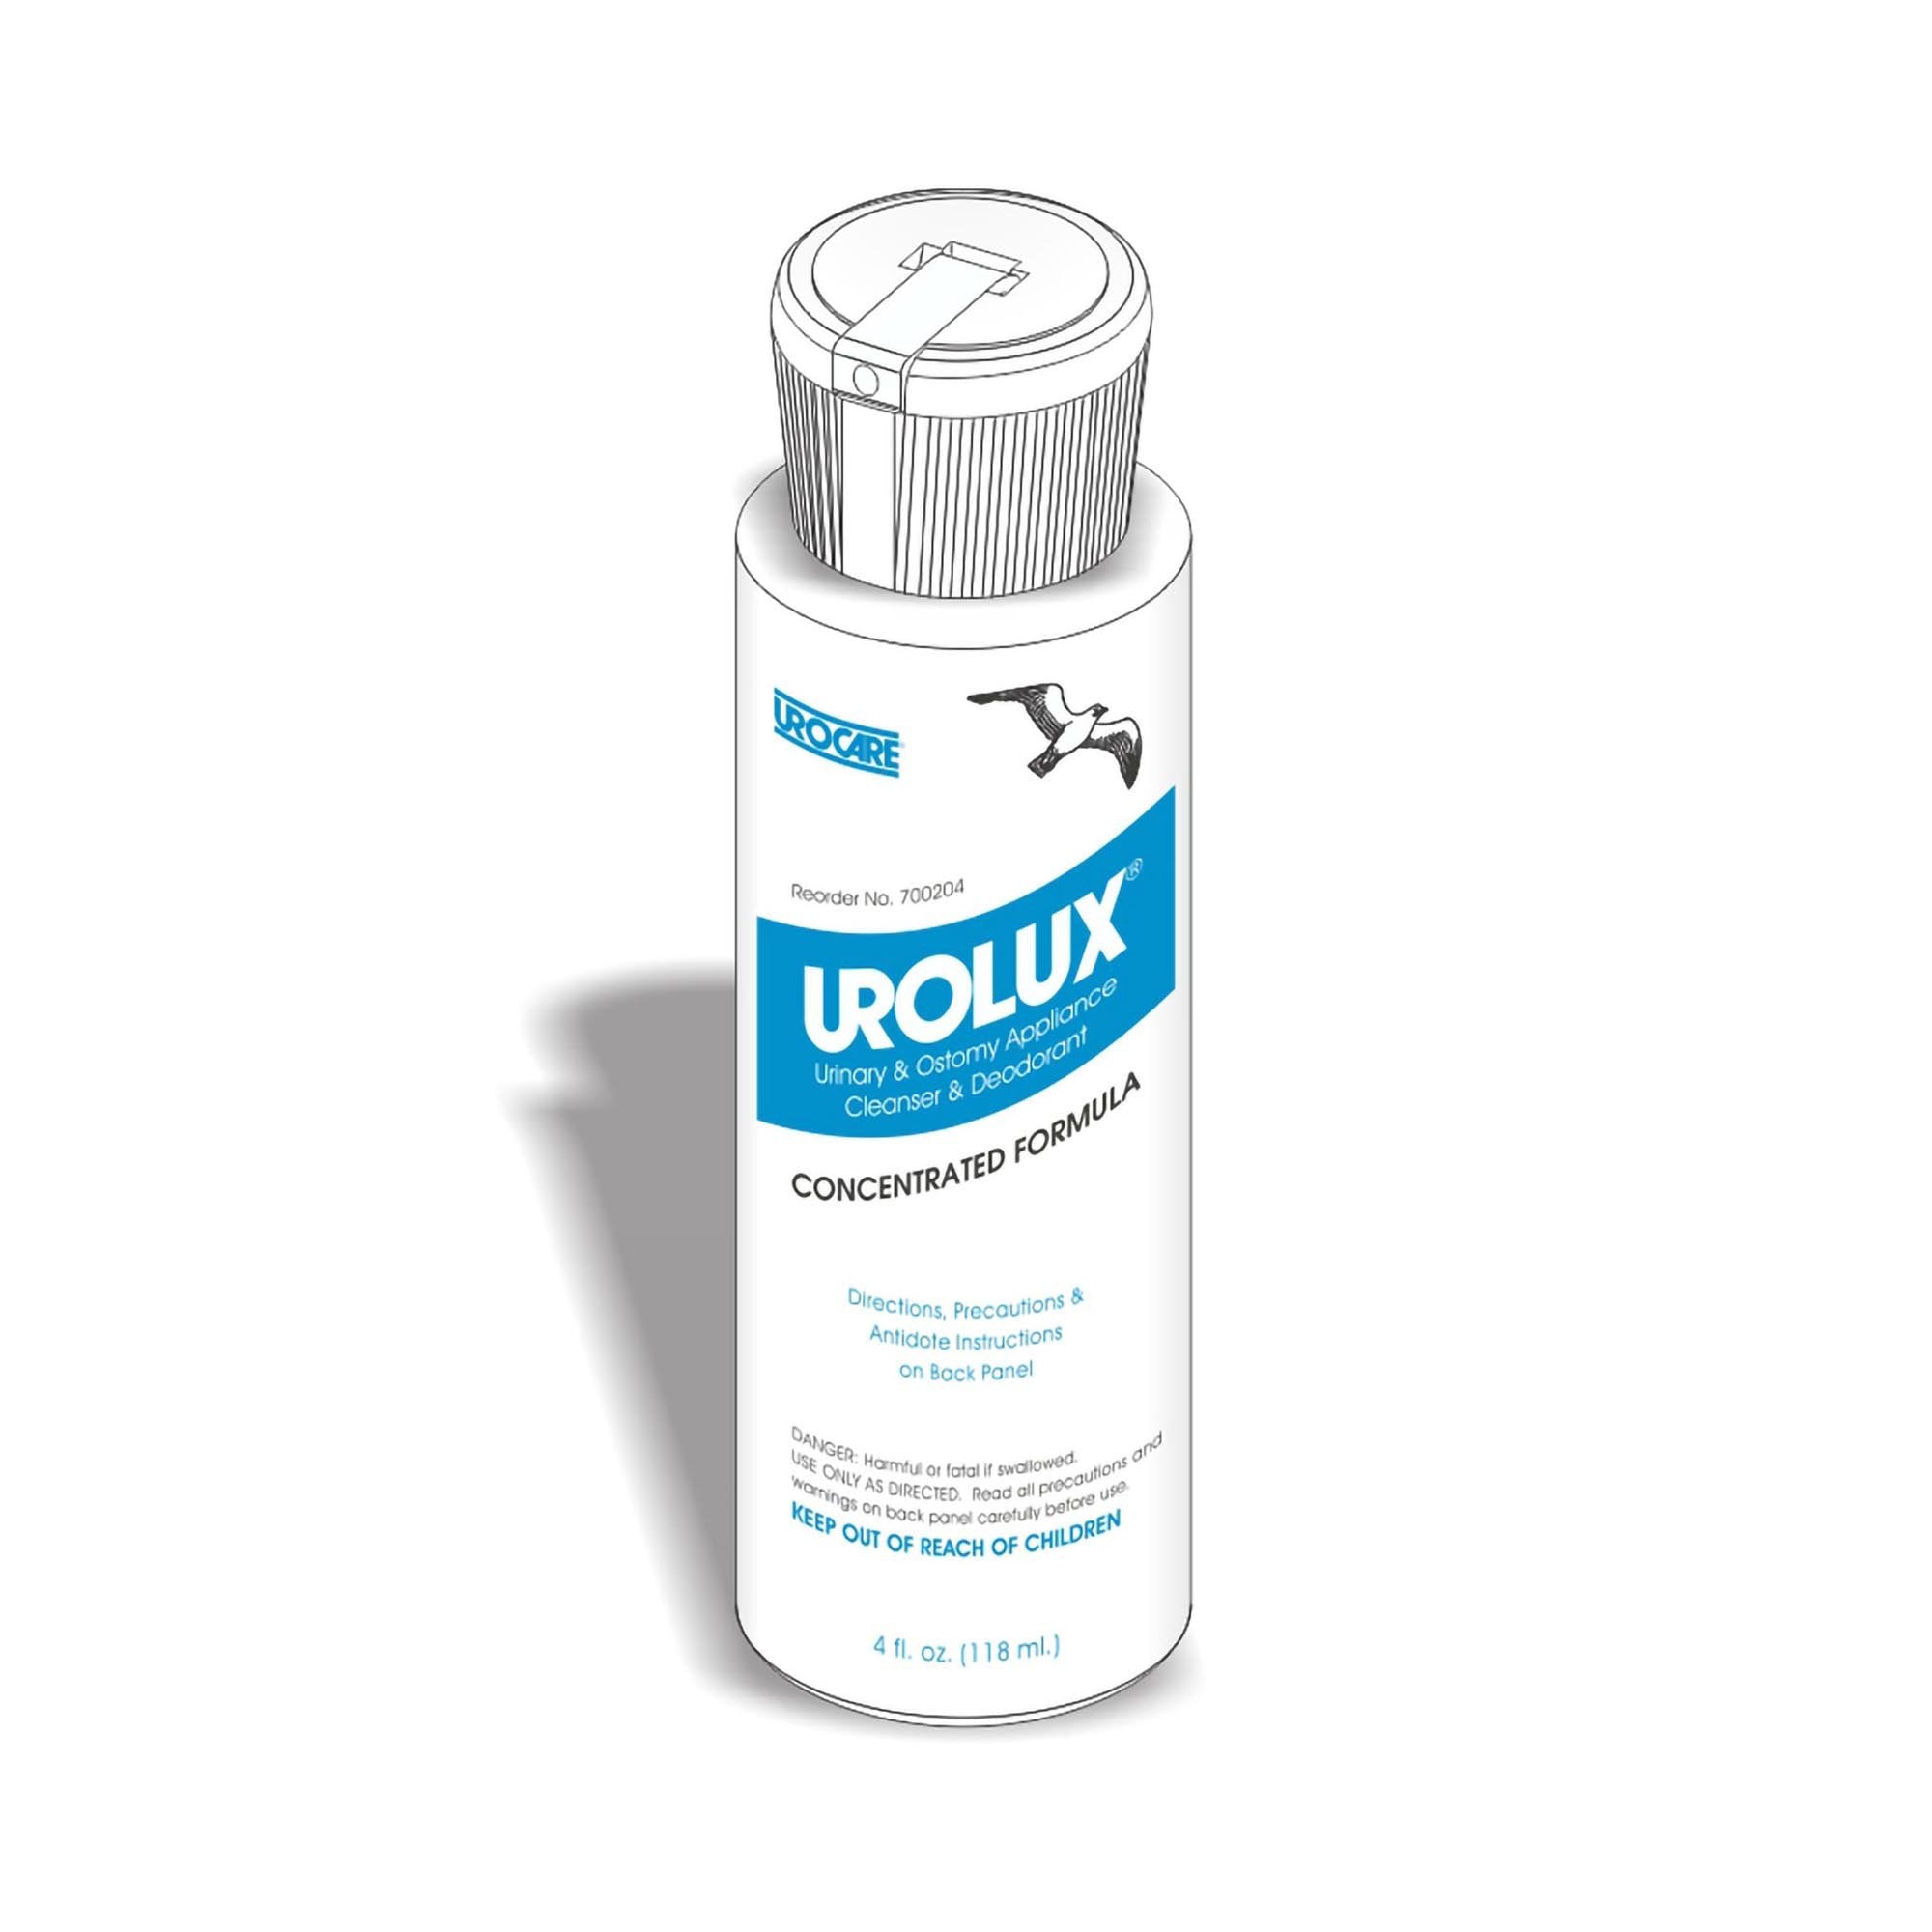 Urinary and Ostomy Appliance Cleanser and Deodorant Urolux® 4 oz., NonSterile